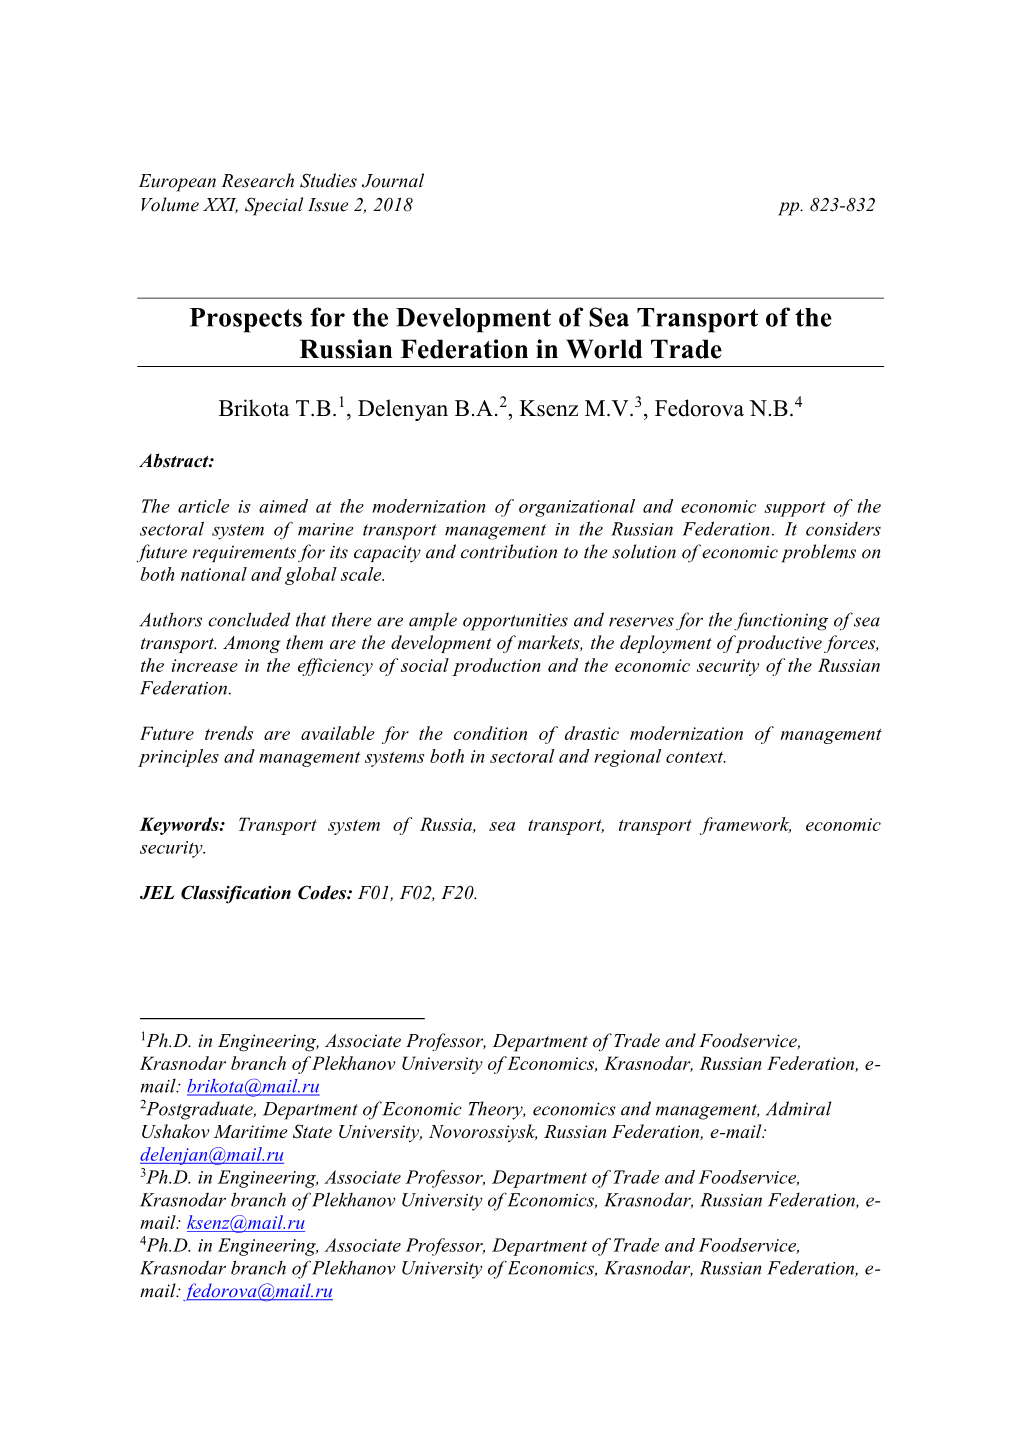 Prospects for the Development of Sea Transport of the Russian Federation in World Trade